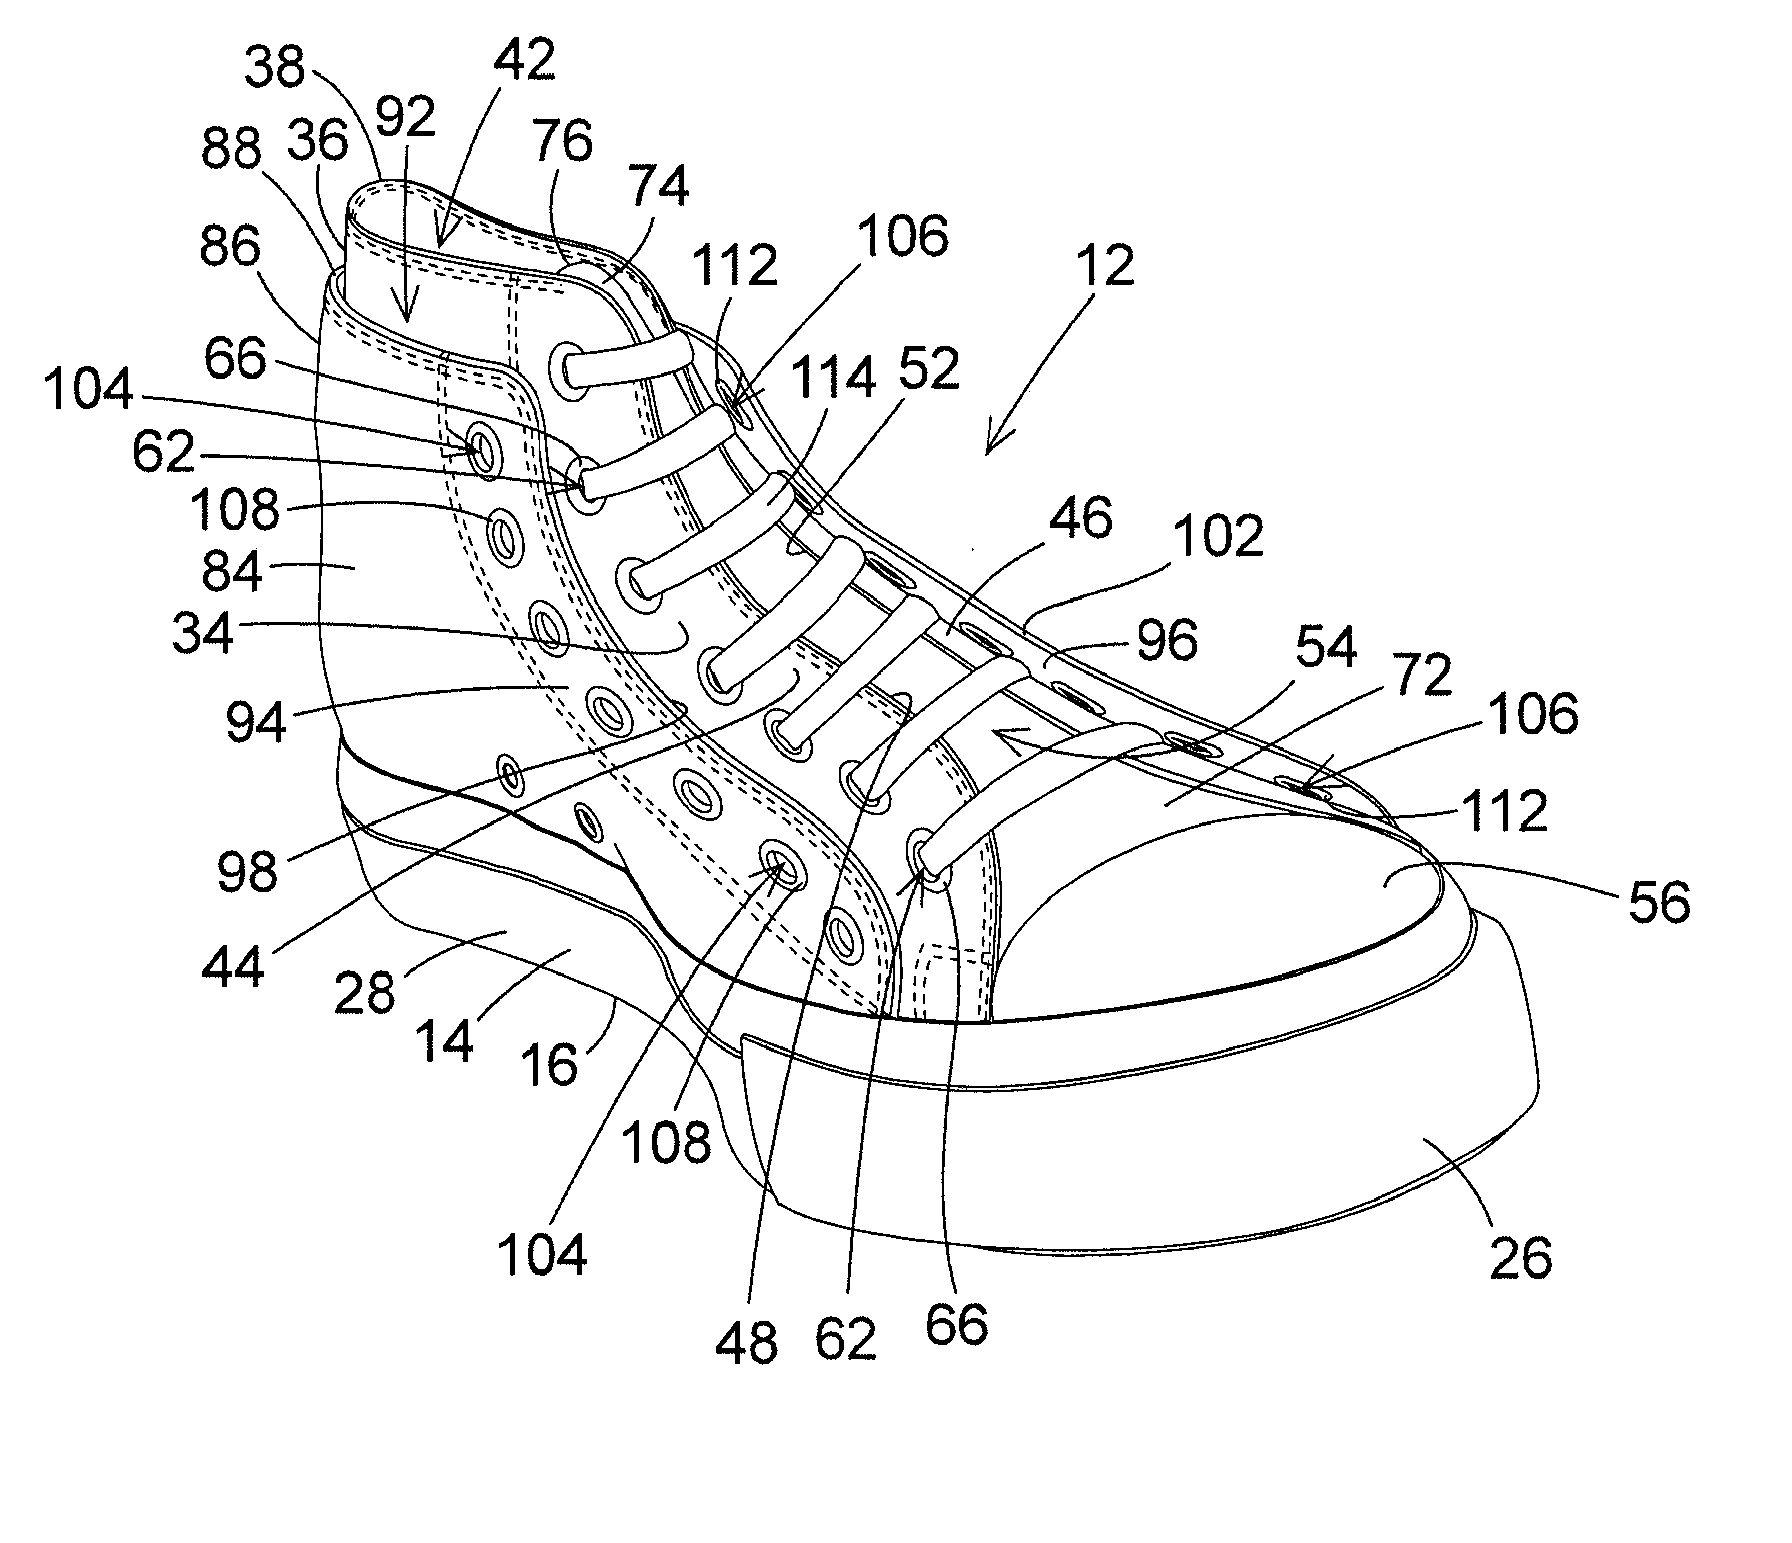 Shoe Construction With Double Upper